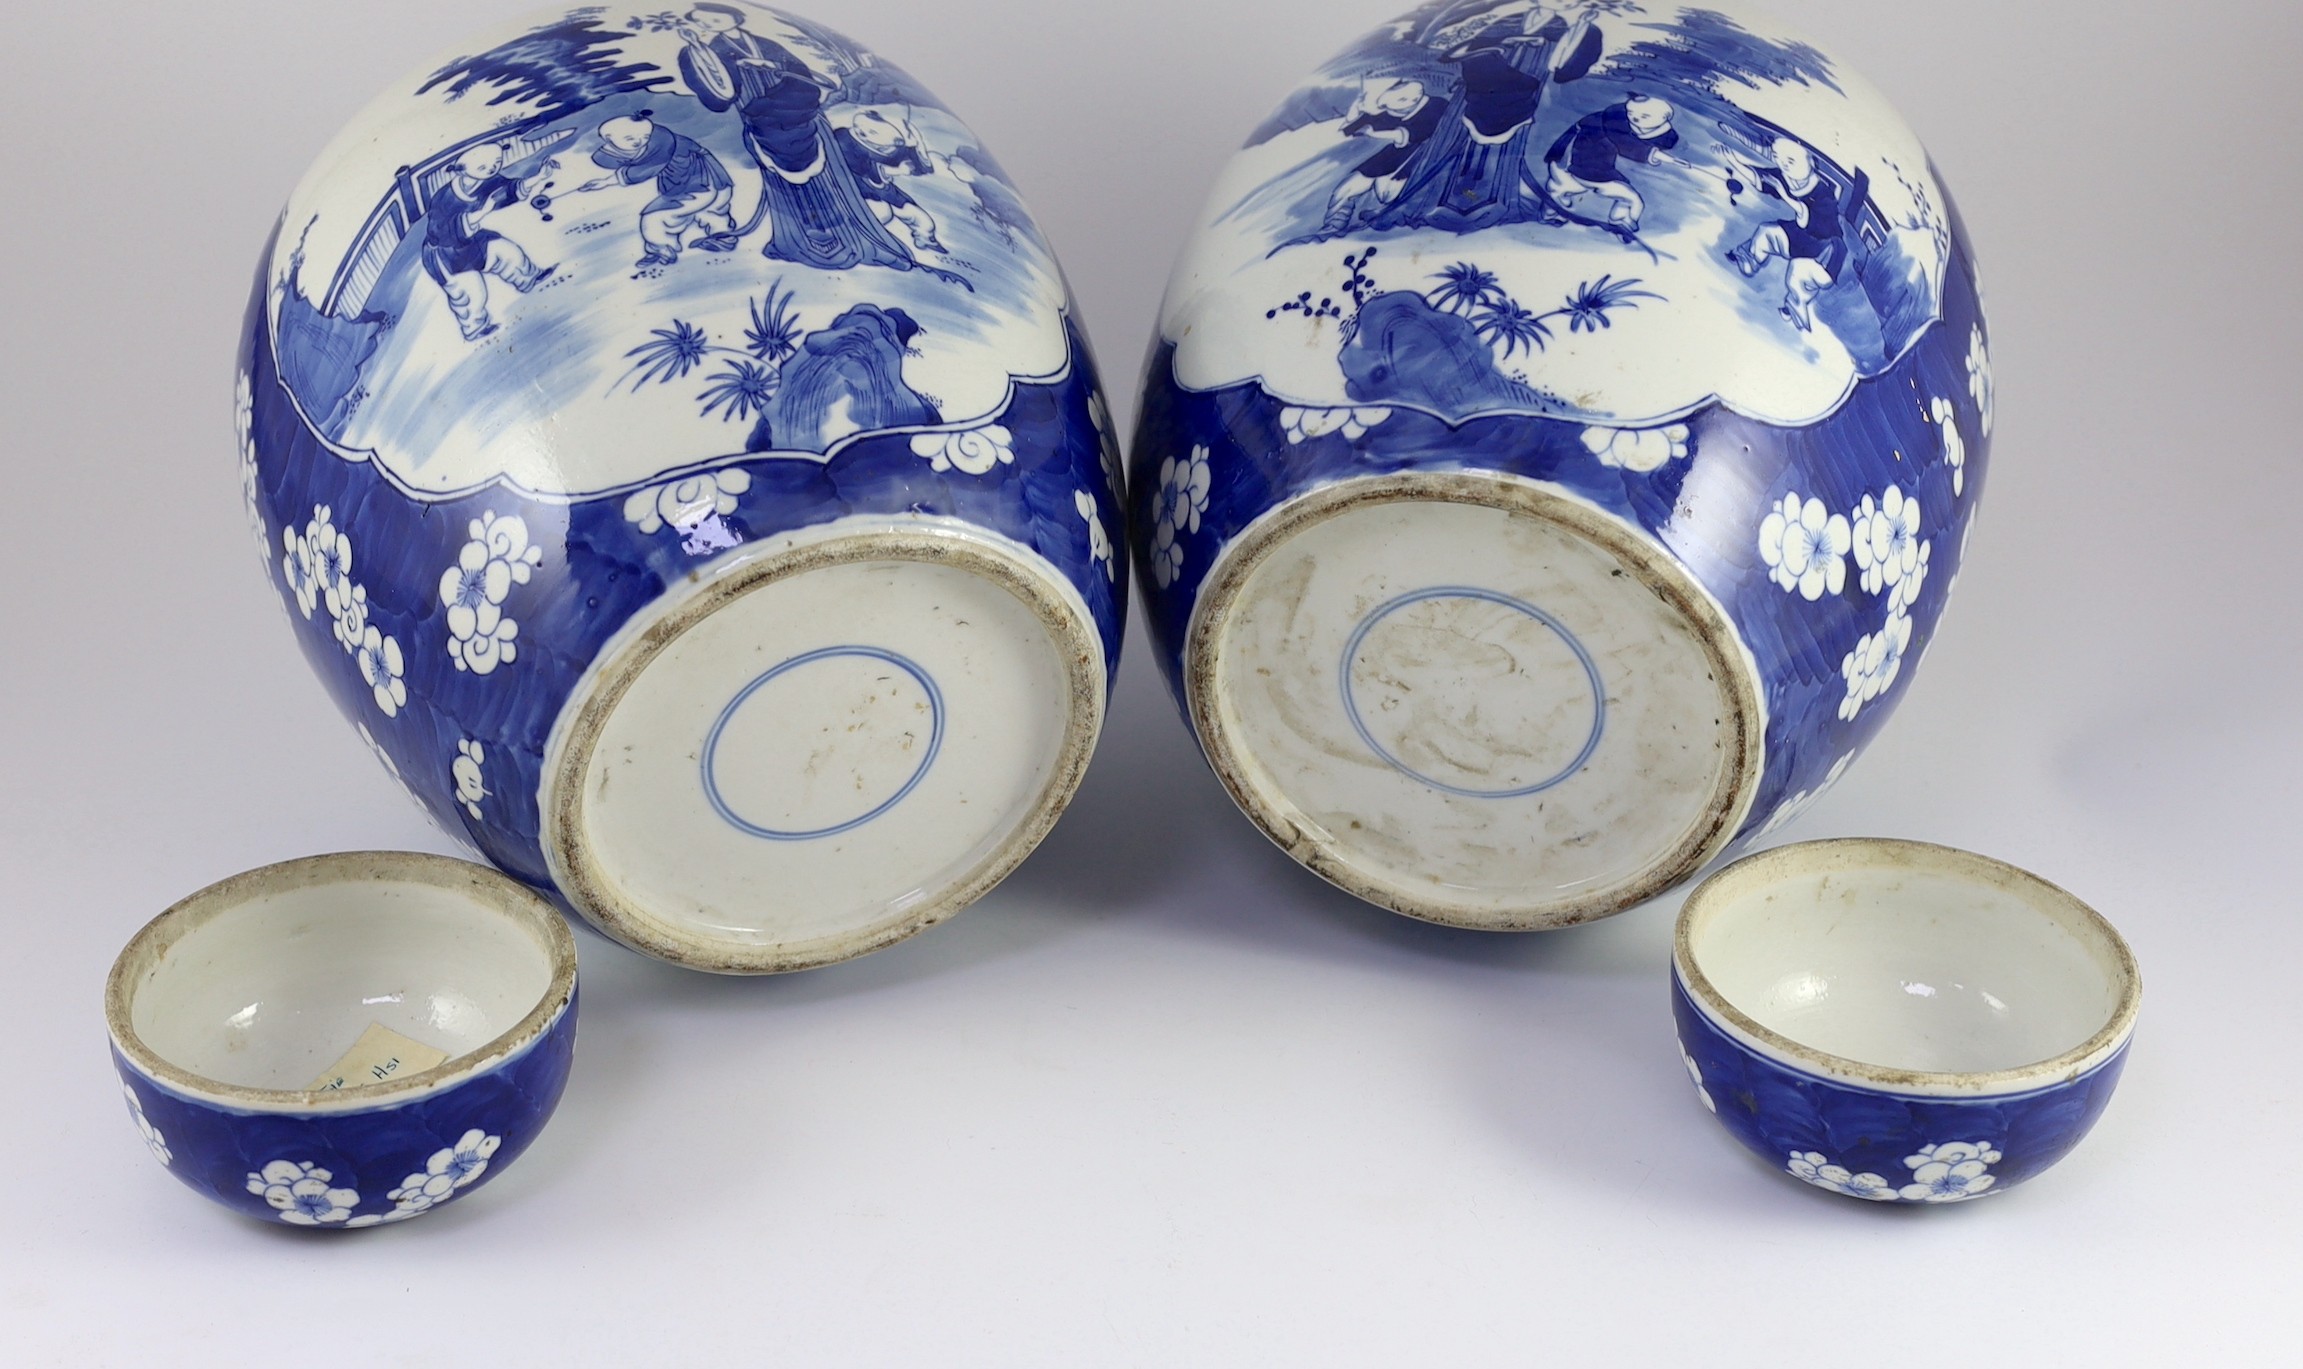 A pair of large Chinese blue and white jars and covers, 19th century, 33cm high